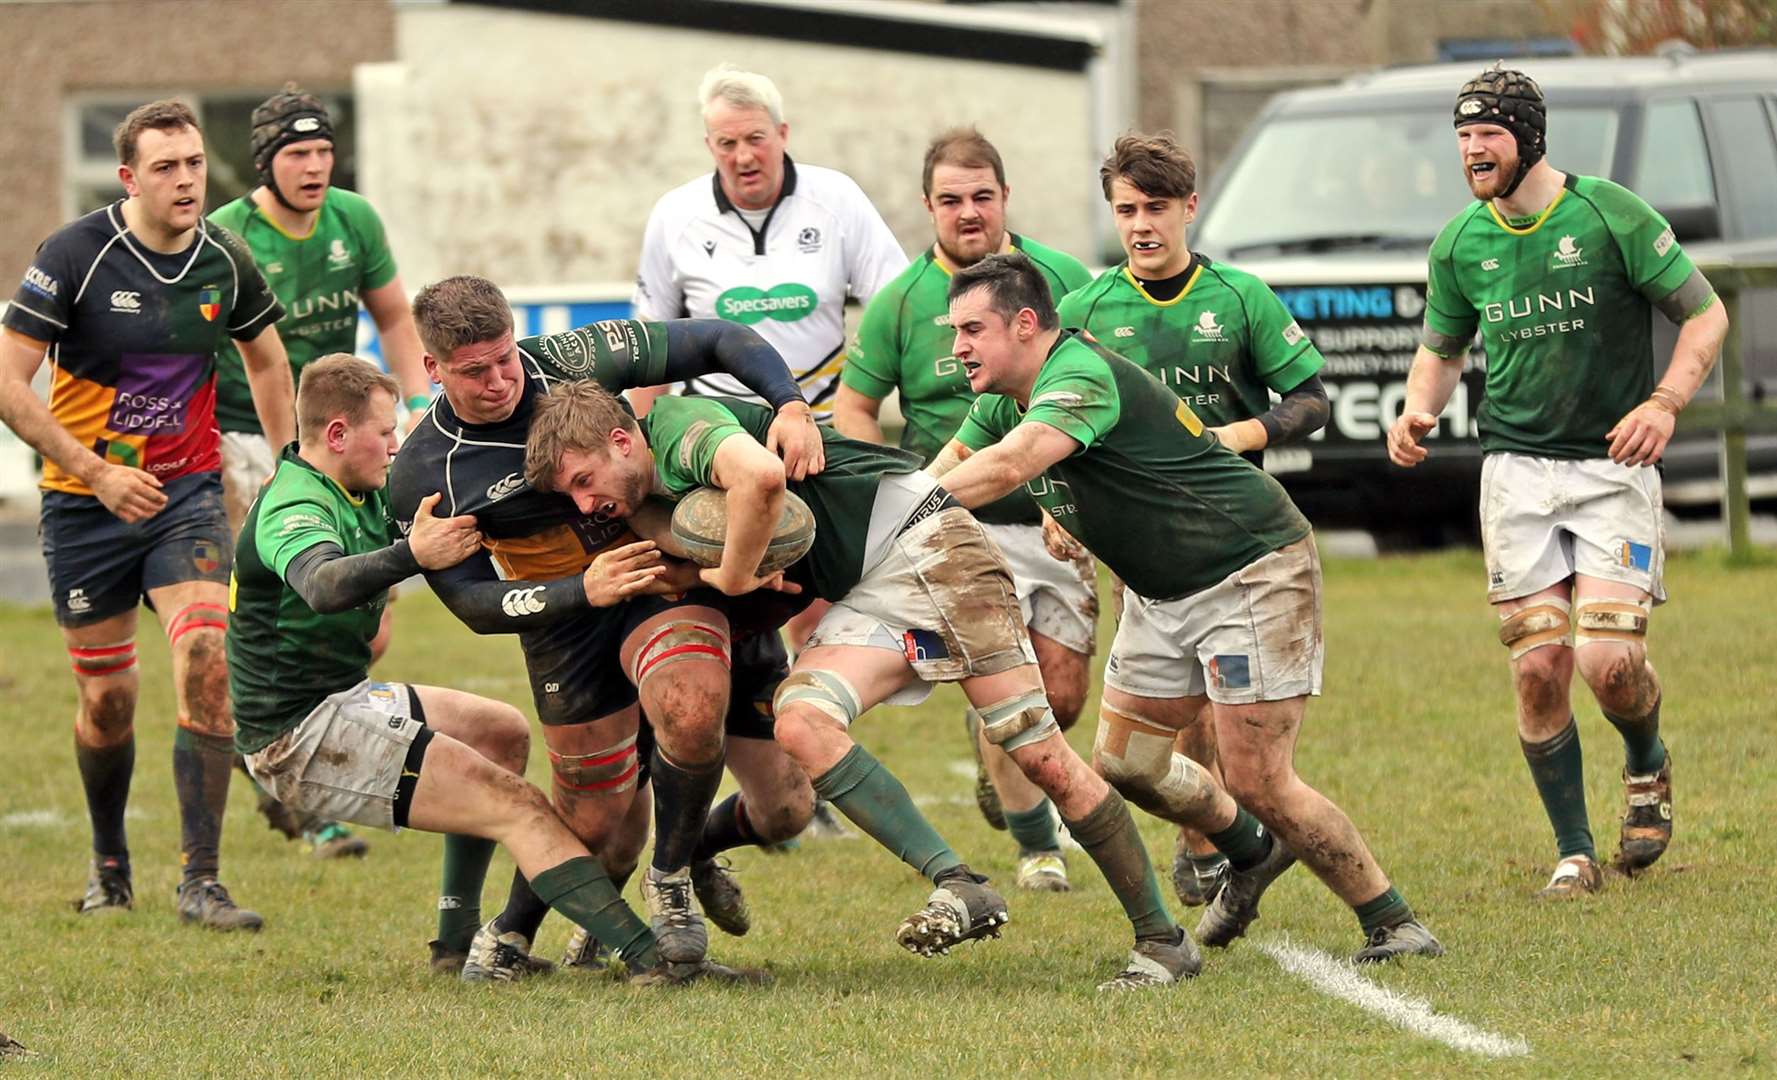 Tom Storey tries to battle his way through for the Greens. Picture: James Gunn